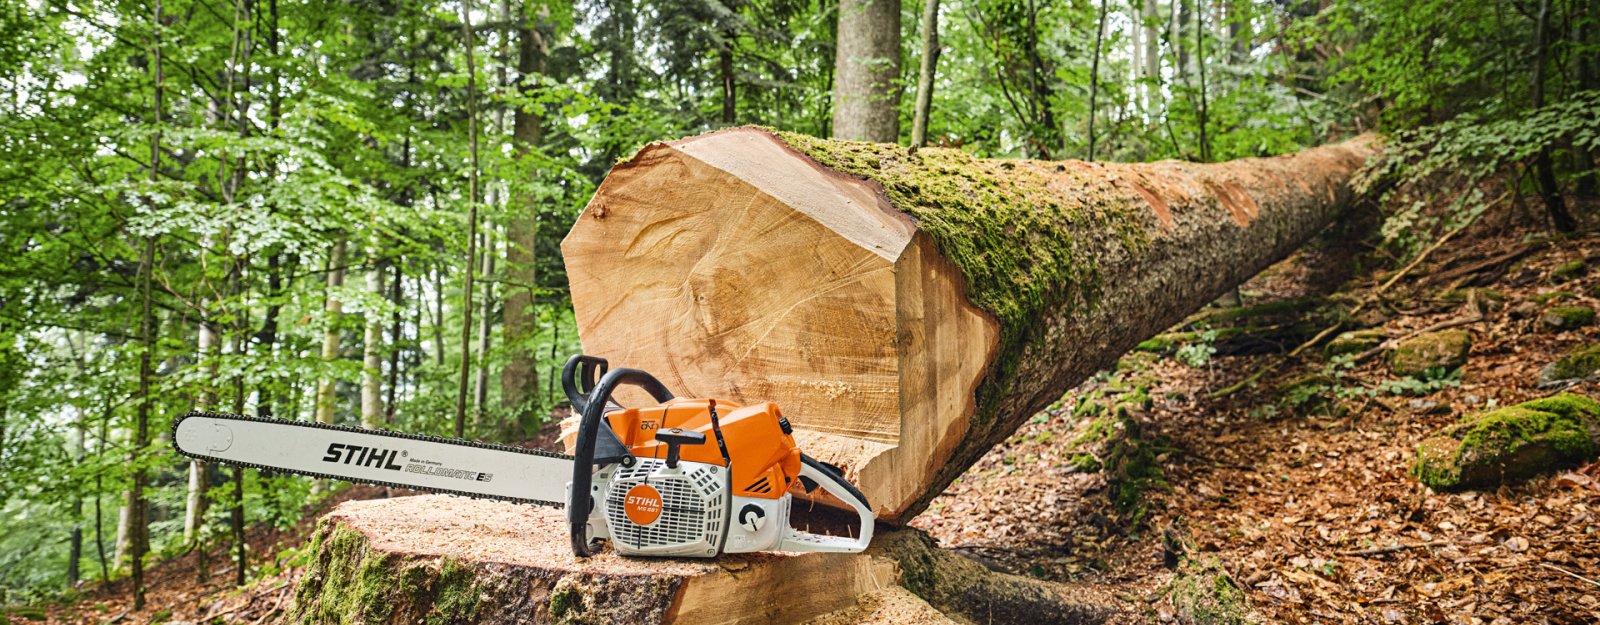 Stihl MS 881 - The world's most powerful production chainsaw